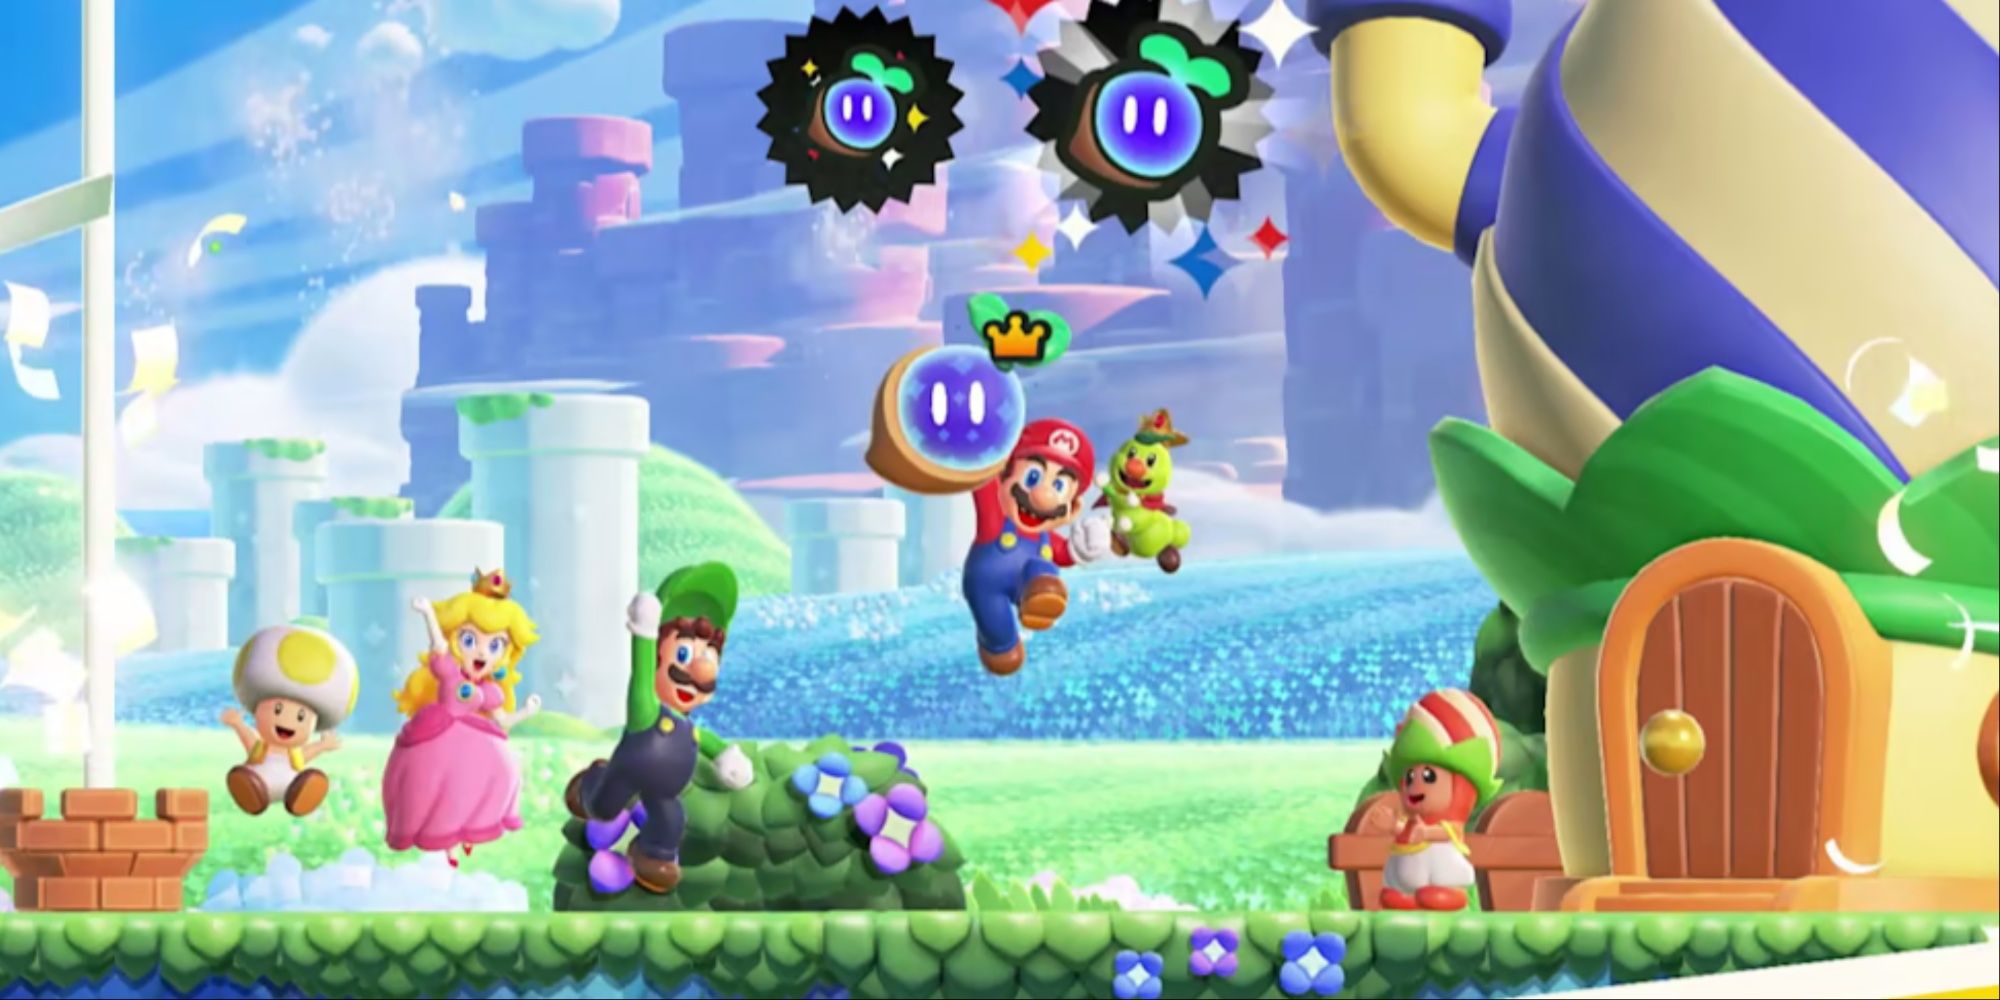 Toad, Peach, Luigi, and Mario jumping up in the air in victory poses by some floating characters and a Poplin standing near a shop.